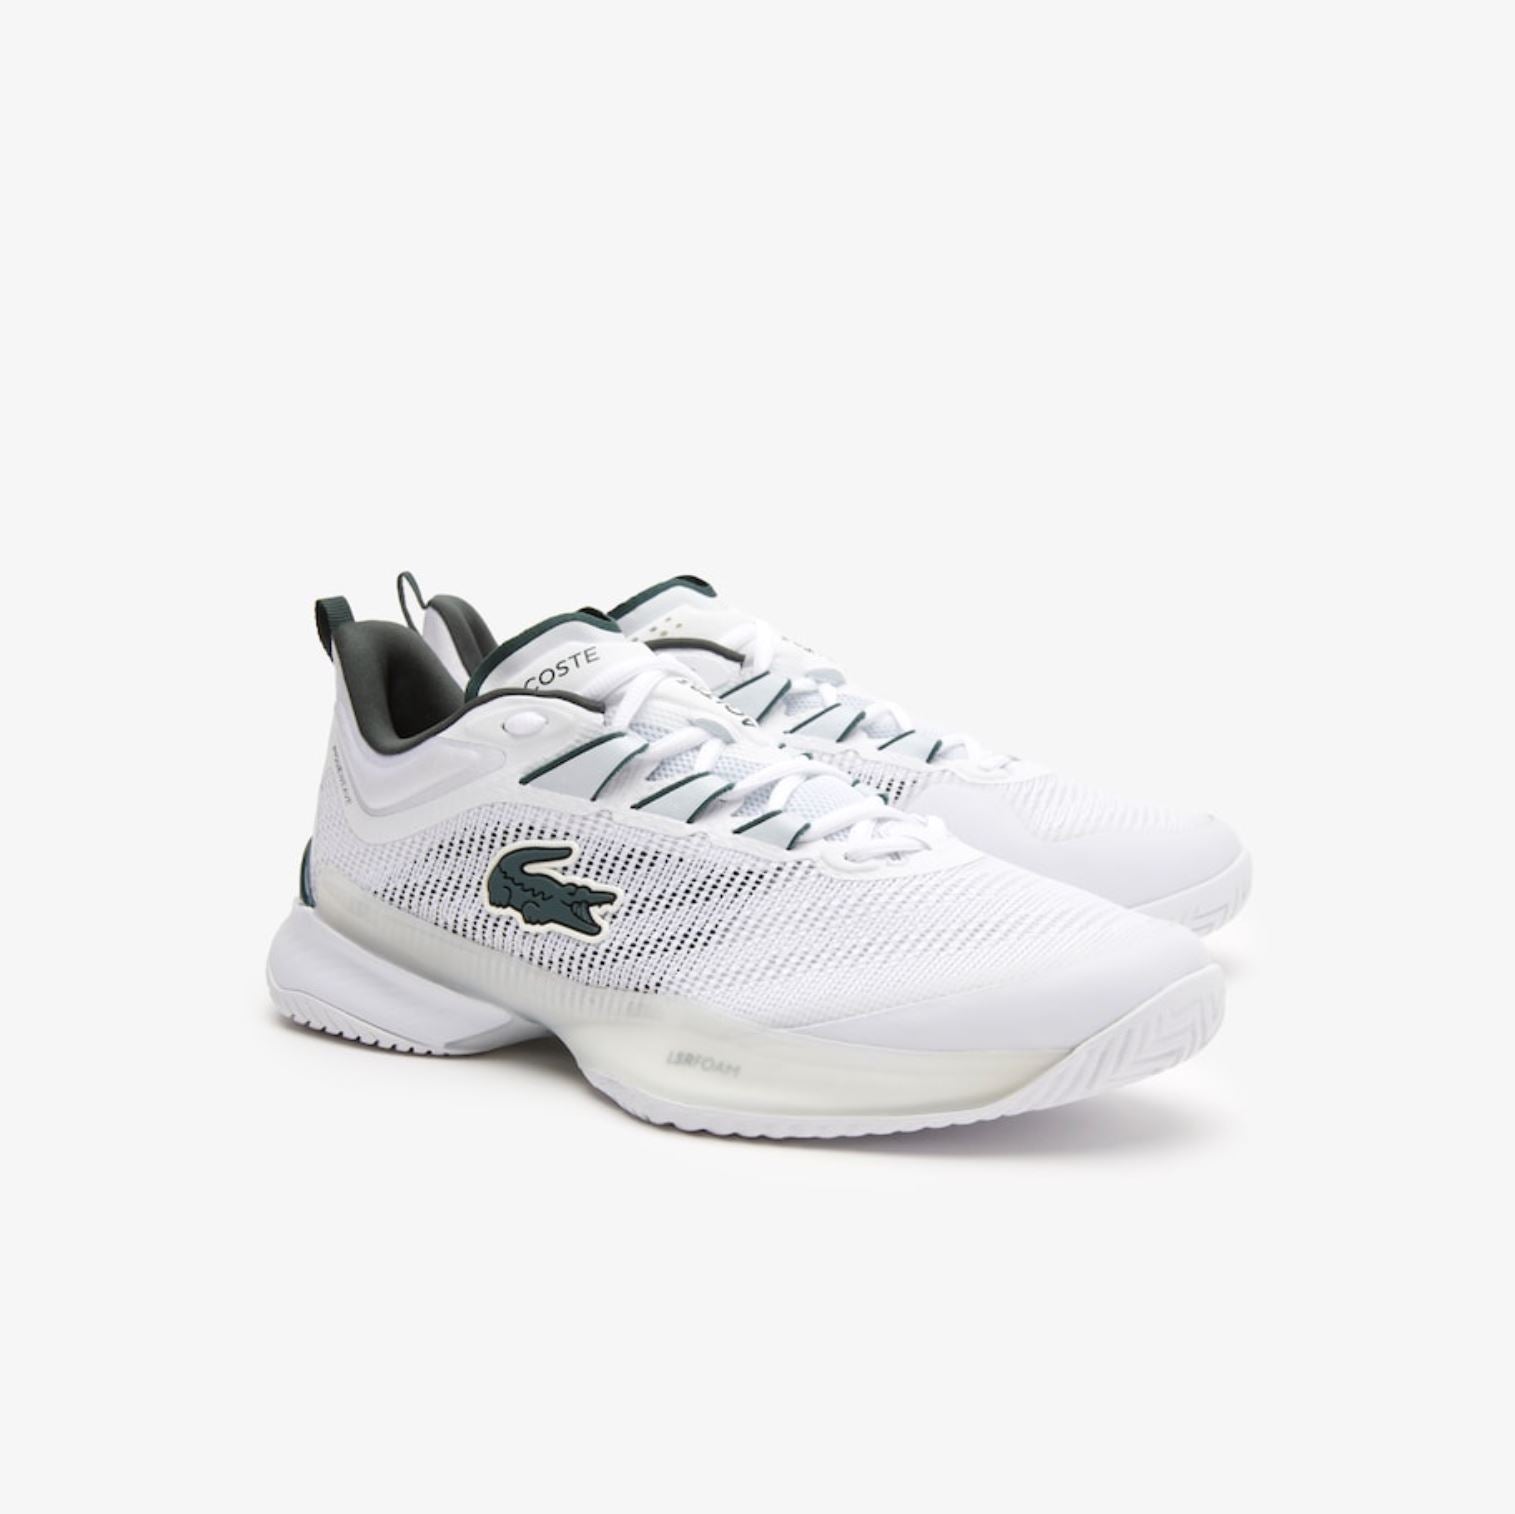 Lacoste Ultra Padel Shoes (White/Dark Green)